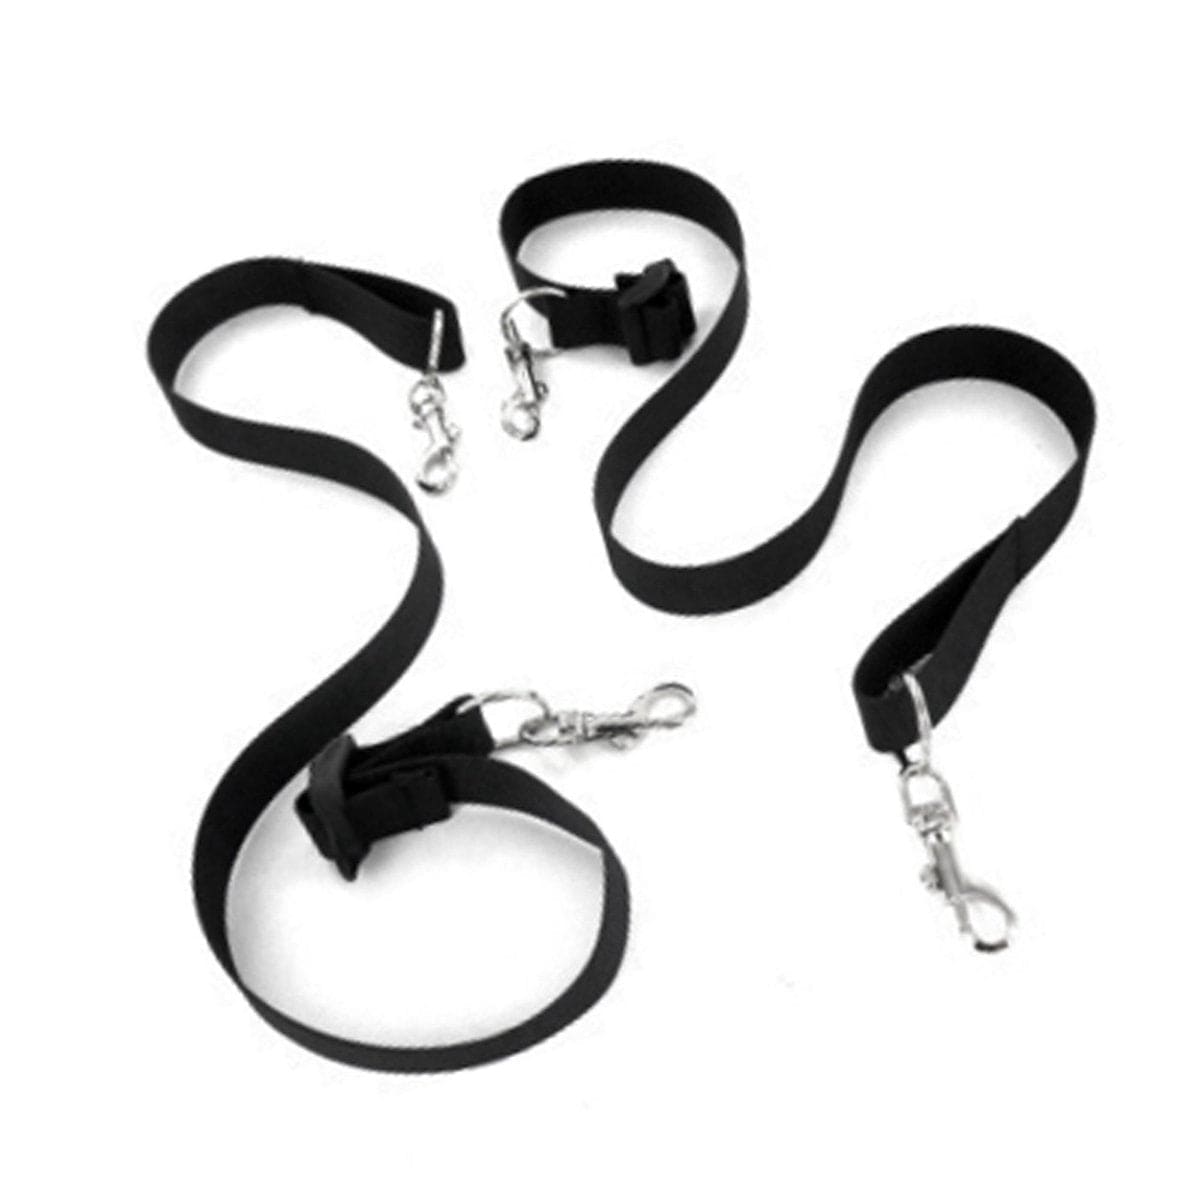 Frisky Full Body Restraint Doggy Style Spread Eagle Restraint Kit at the Haus of Shag